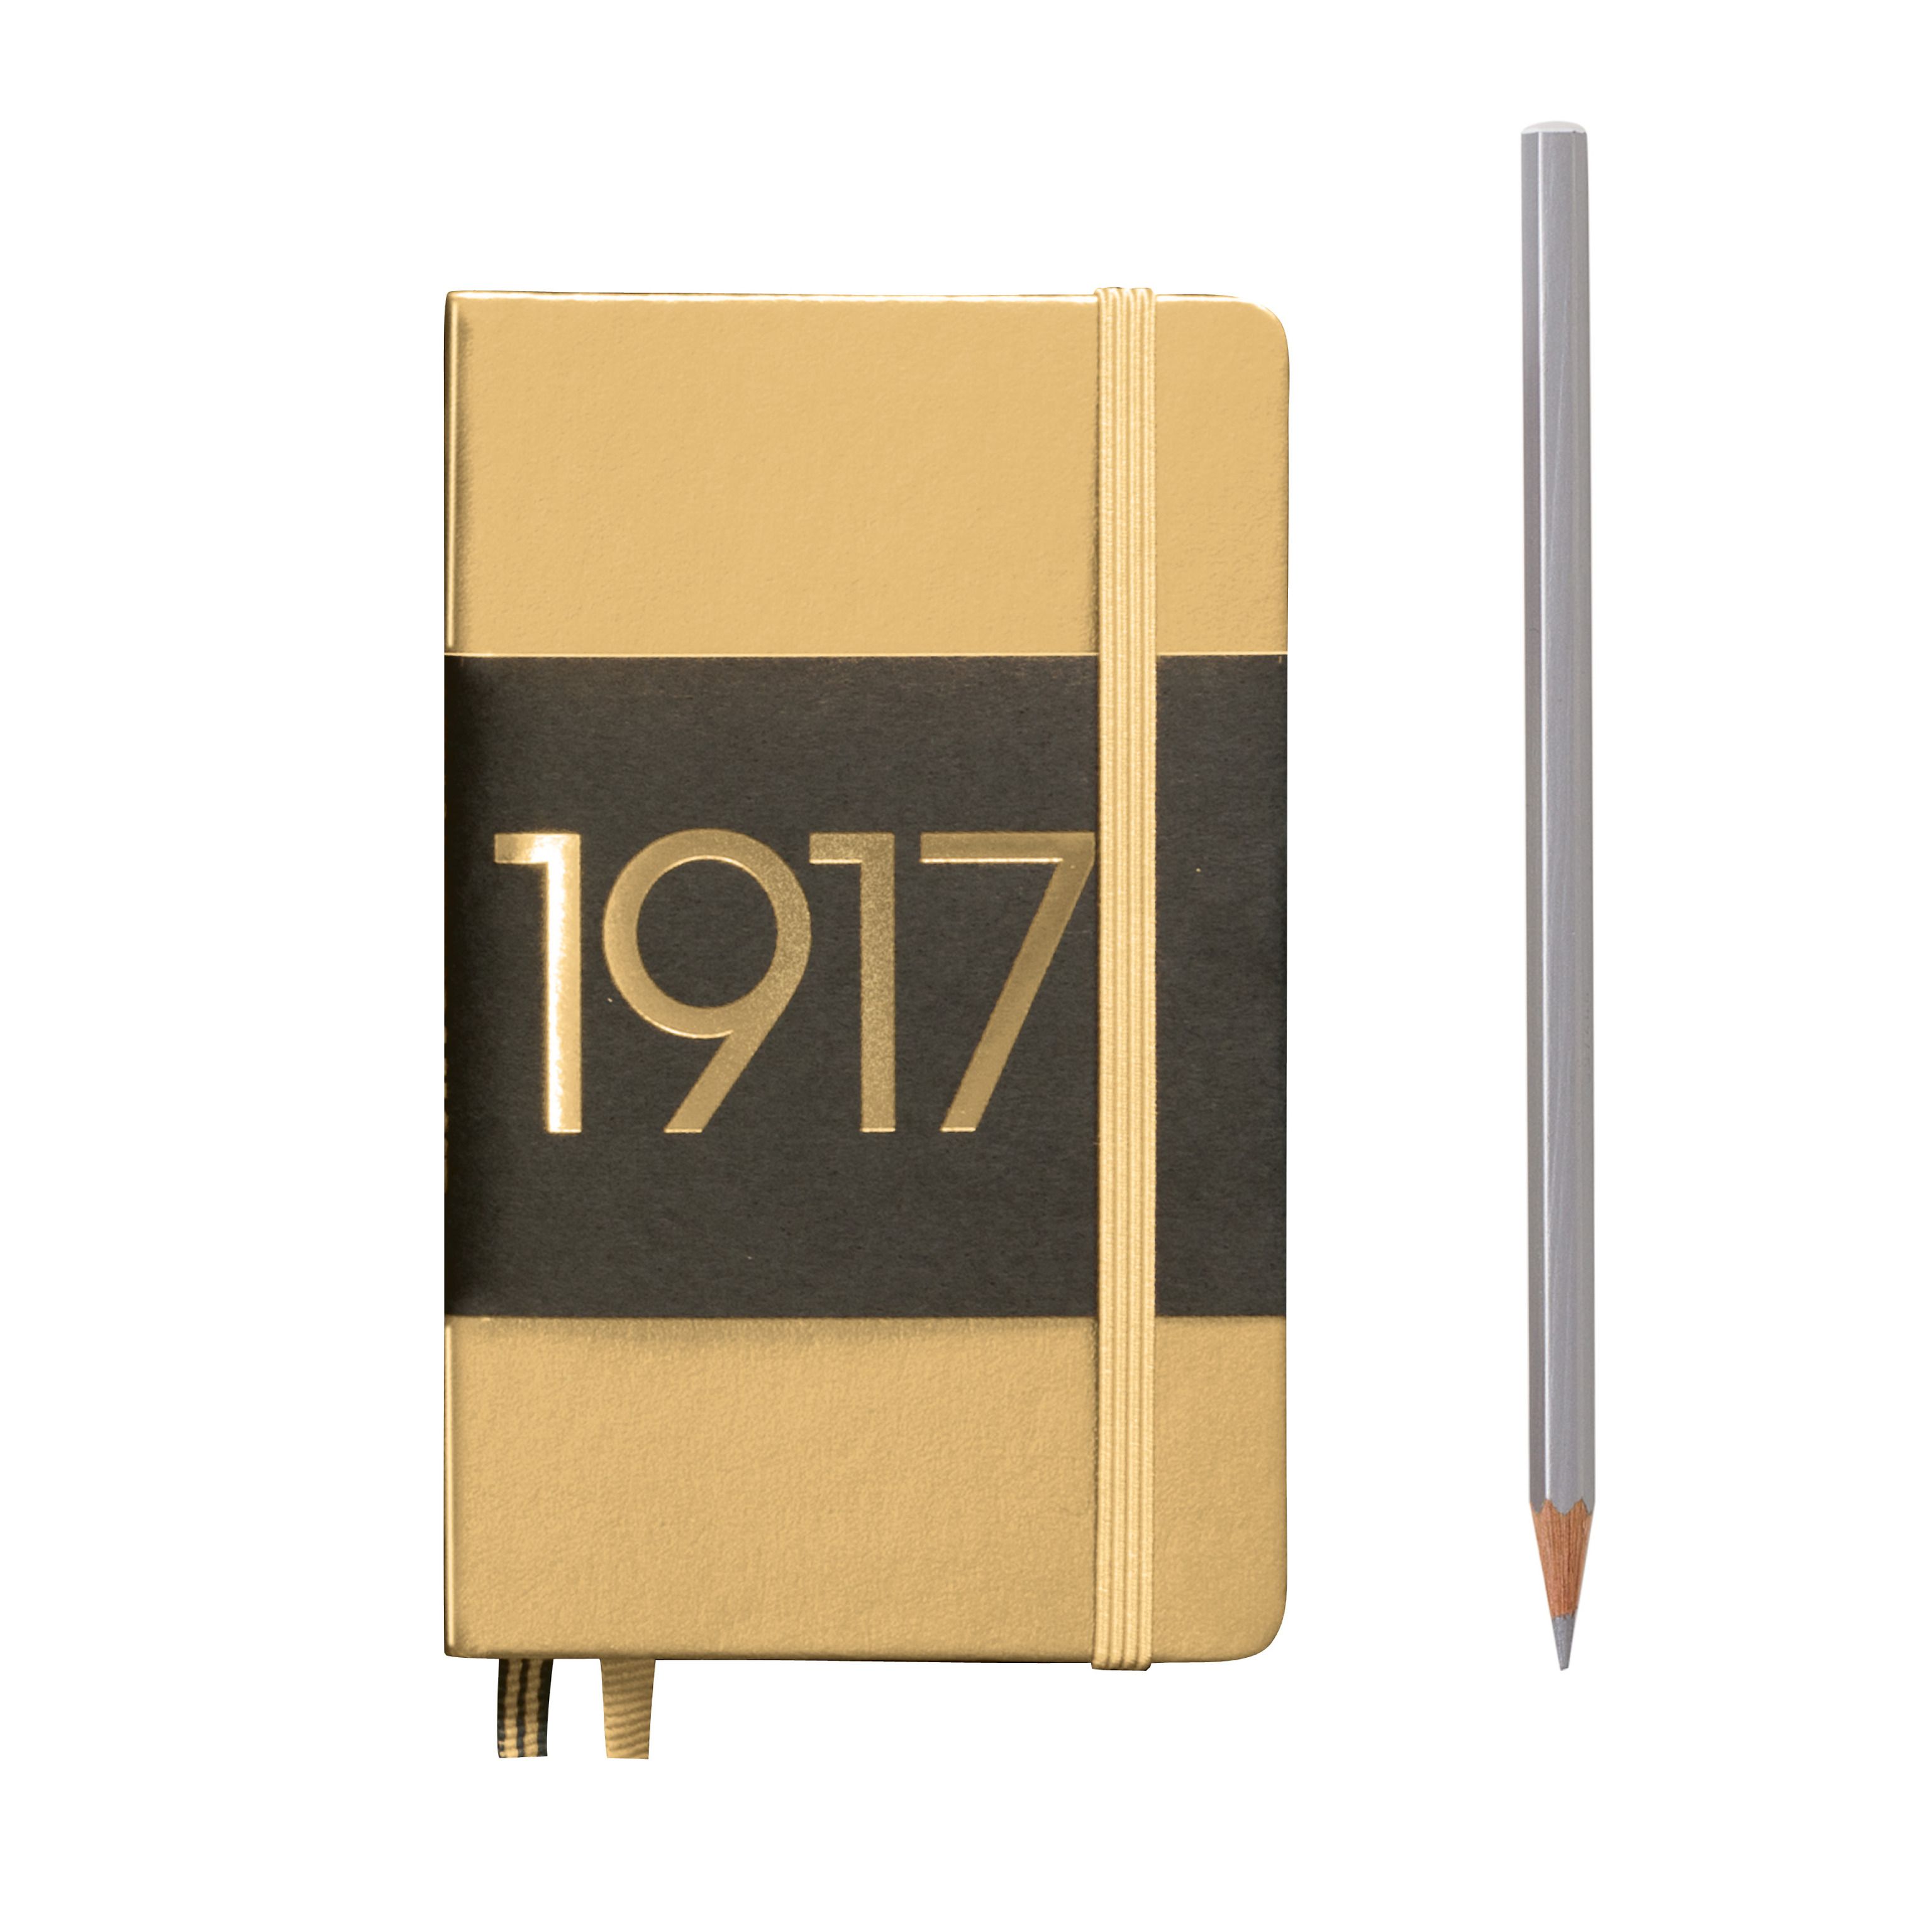 LEUCHTTURM1917 - Notebook Hardcover Medium A5-251 Numbered Pages for  Writing and Journaling (Black, Dotted)